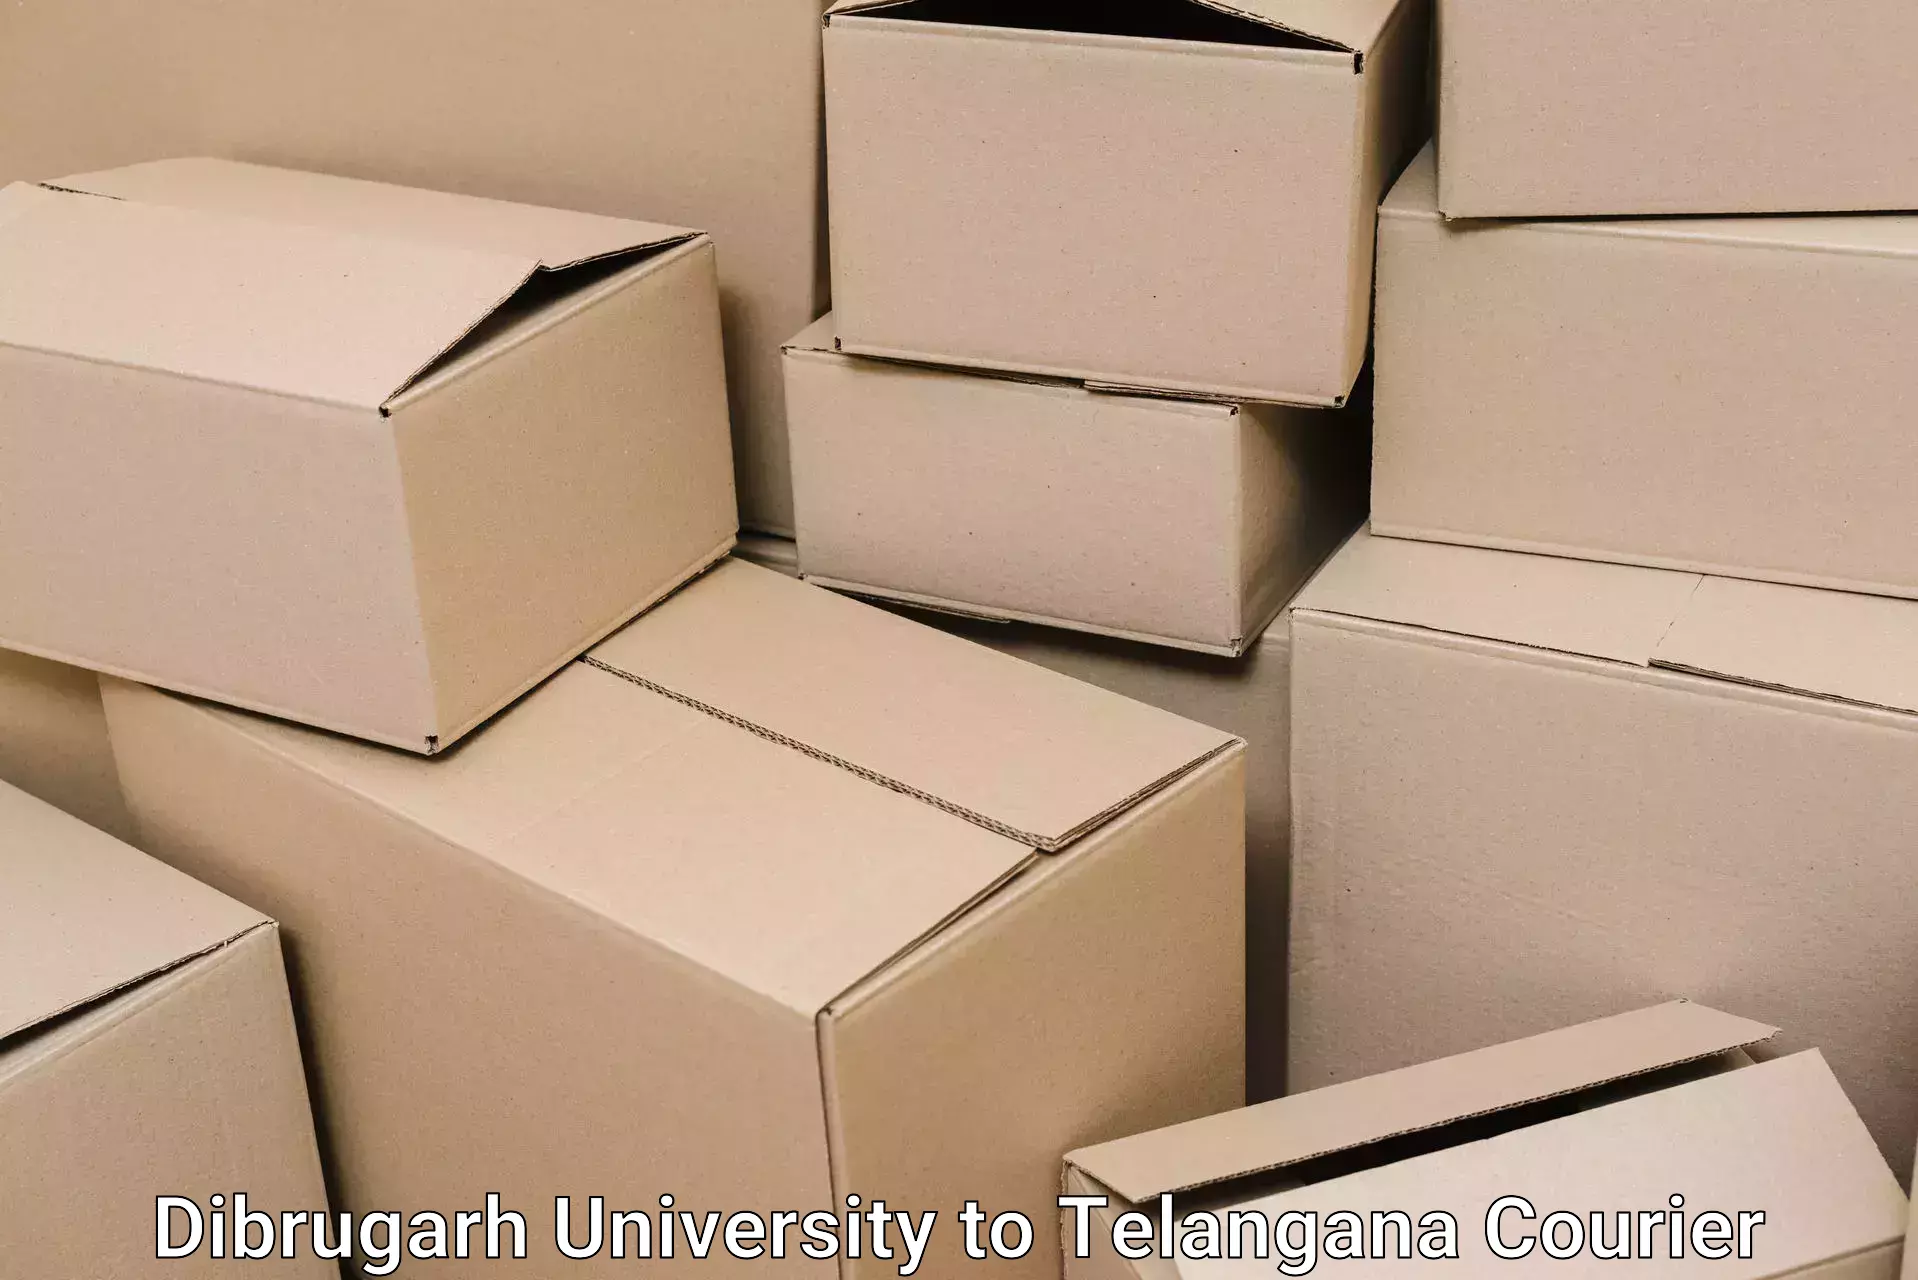 Furniture transport services Dibrugarh University to Bachupally